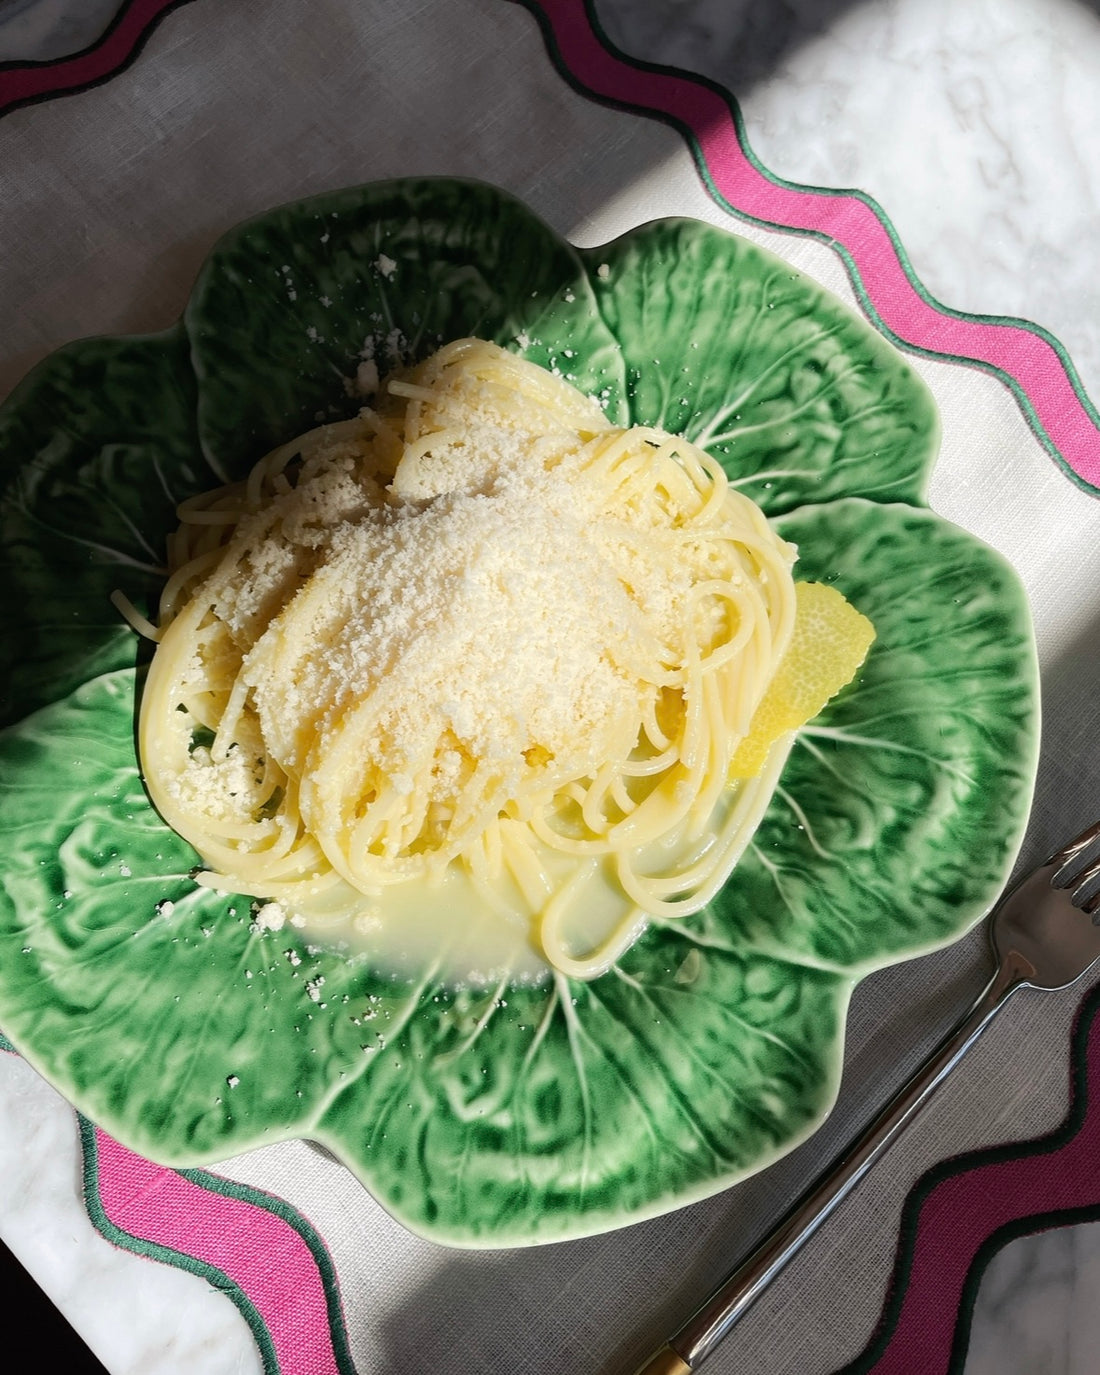 Spaghetti al limone with ingredients